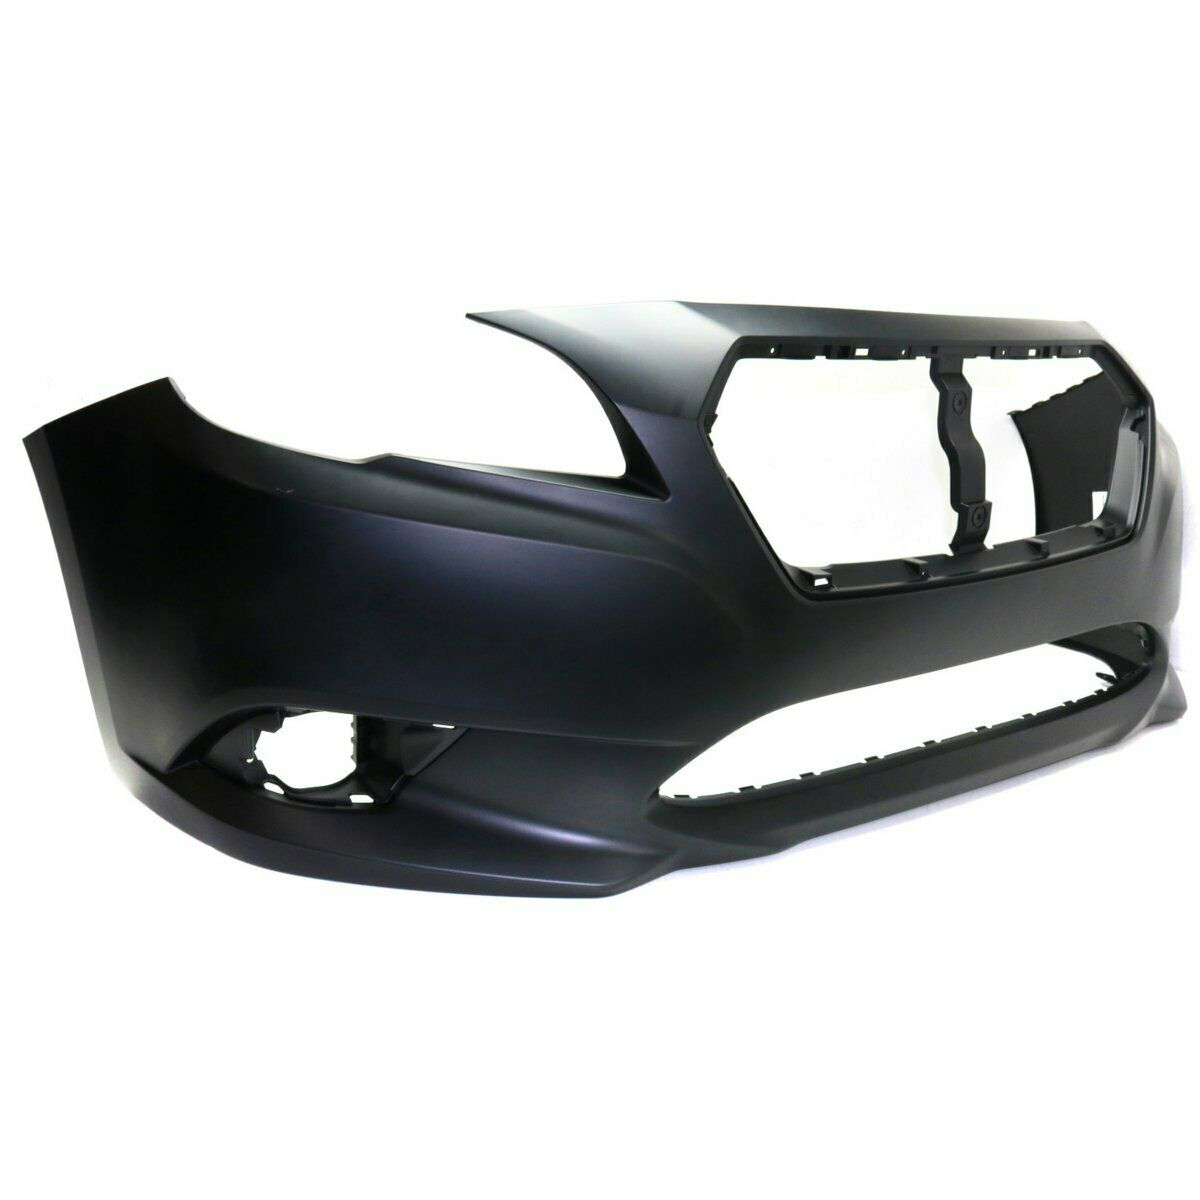 2015-2017 Subaru Legacy Front Bumper Painted to Match